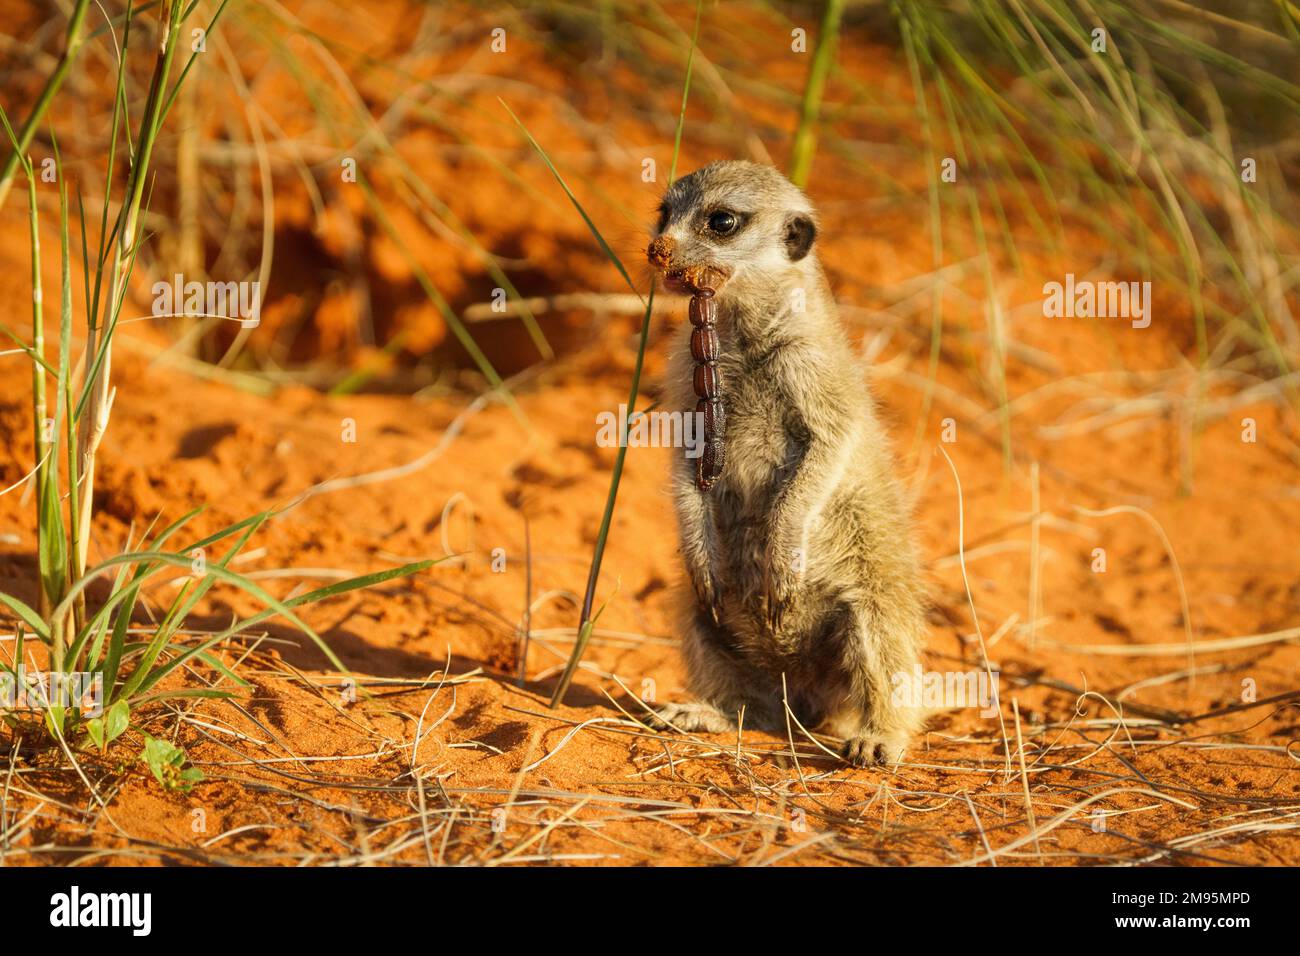 Baby Meerkat (Suricata suricatta) stands upright with a scorpion in its mouth. The scorpion's tail hangs down. Kalahari, South Africa Stock Photo